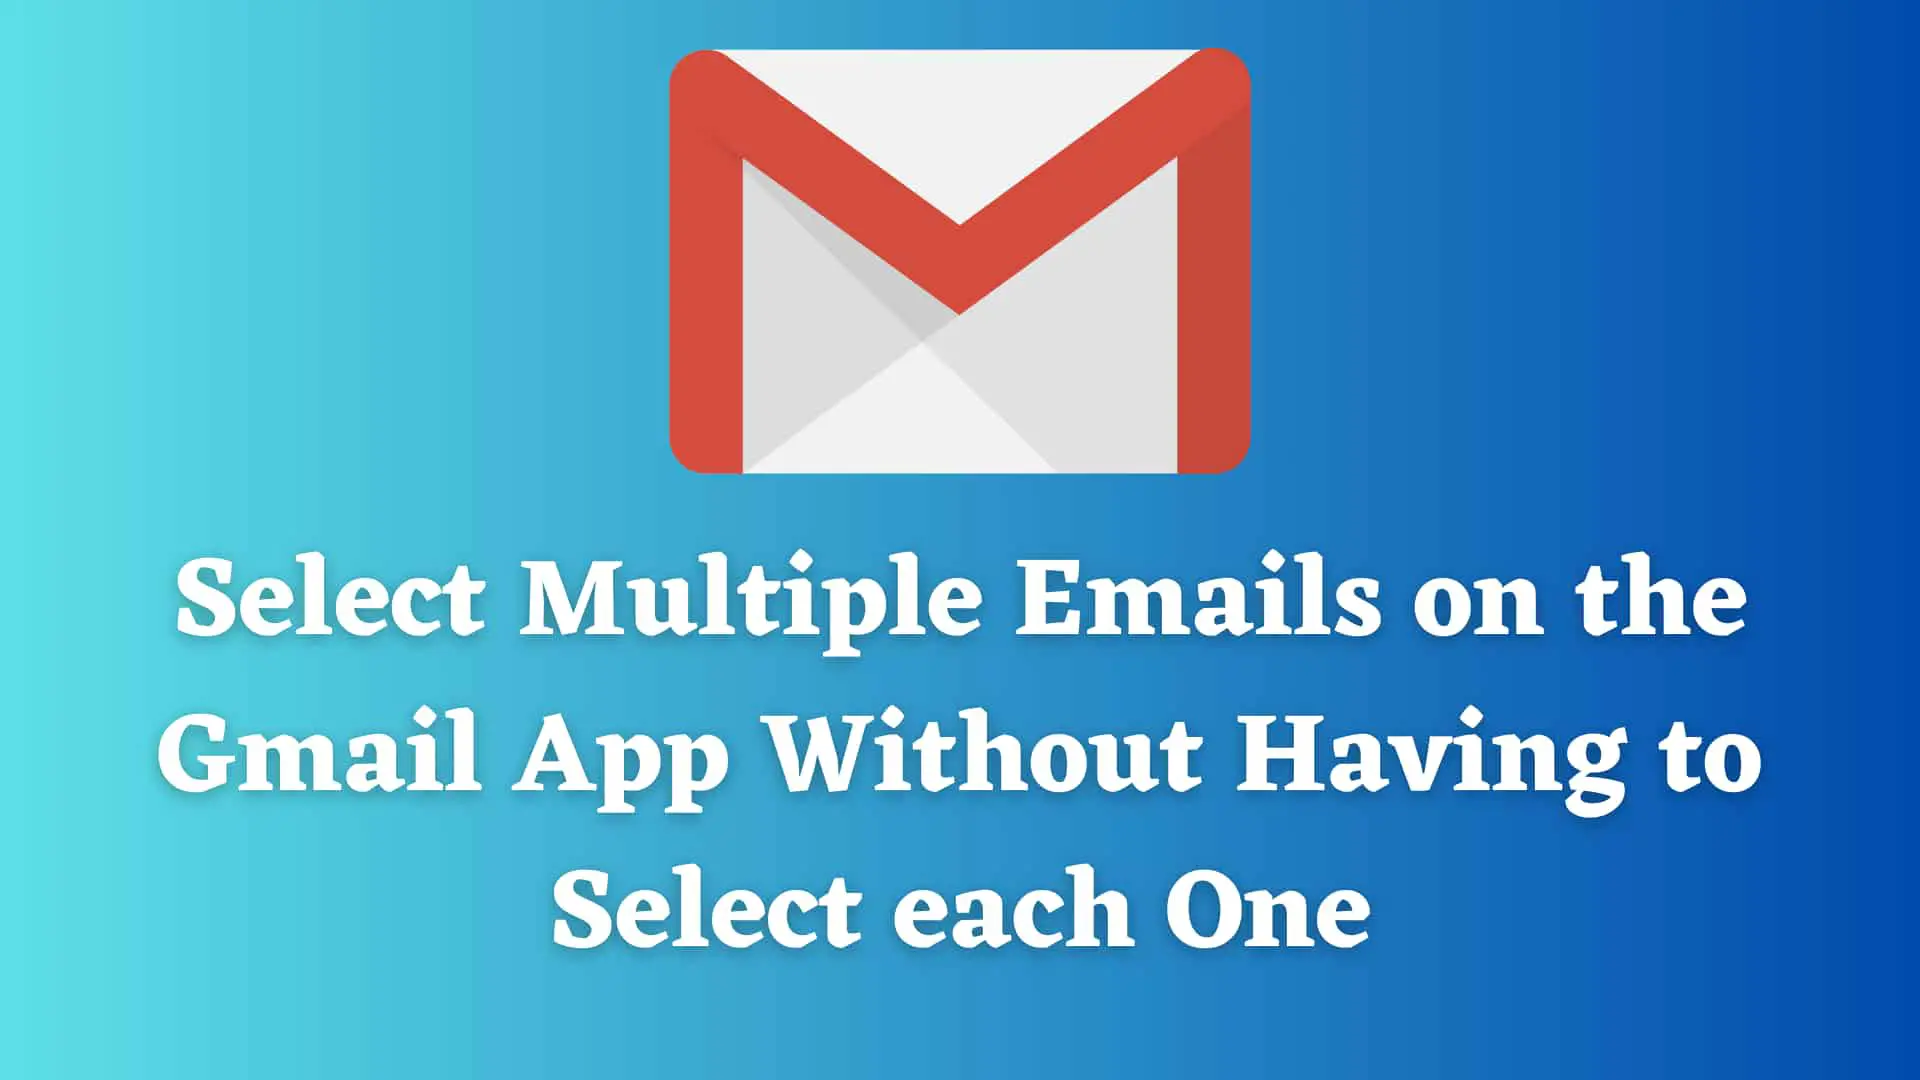 select-multiple-emails-gmail-app-gmail-web-with-ease